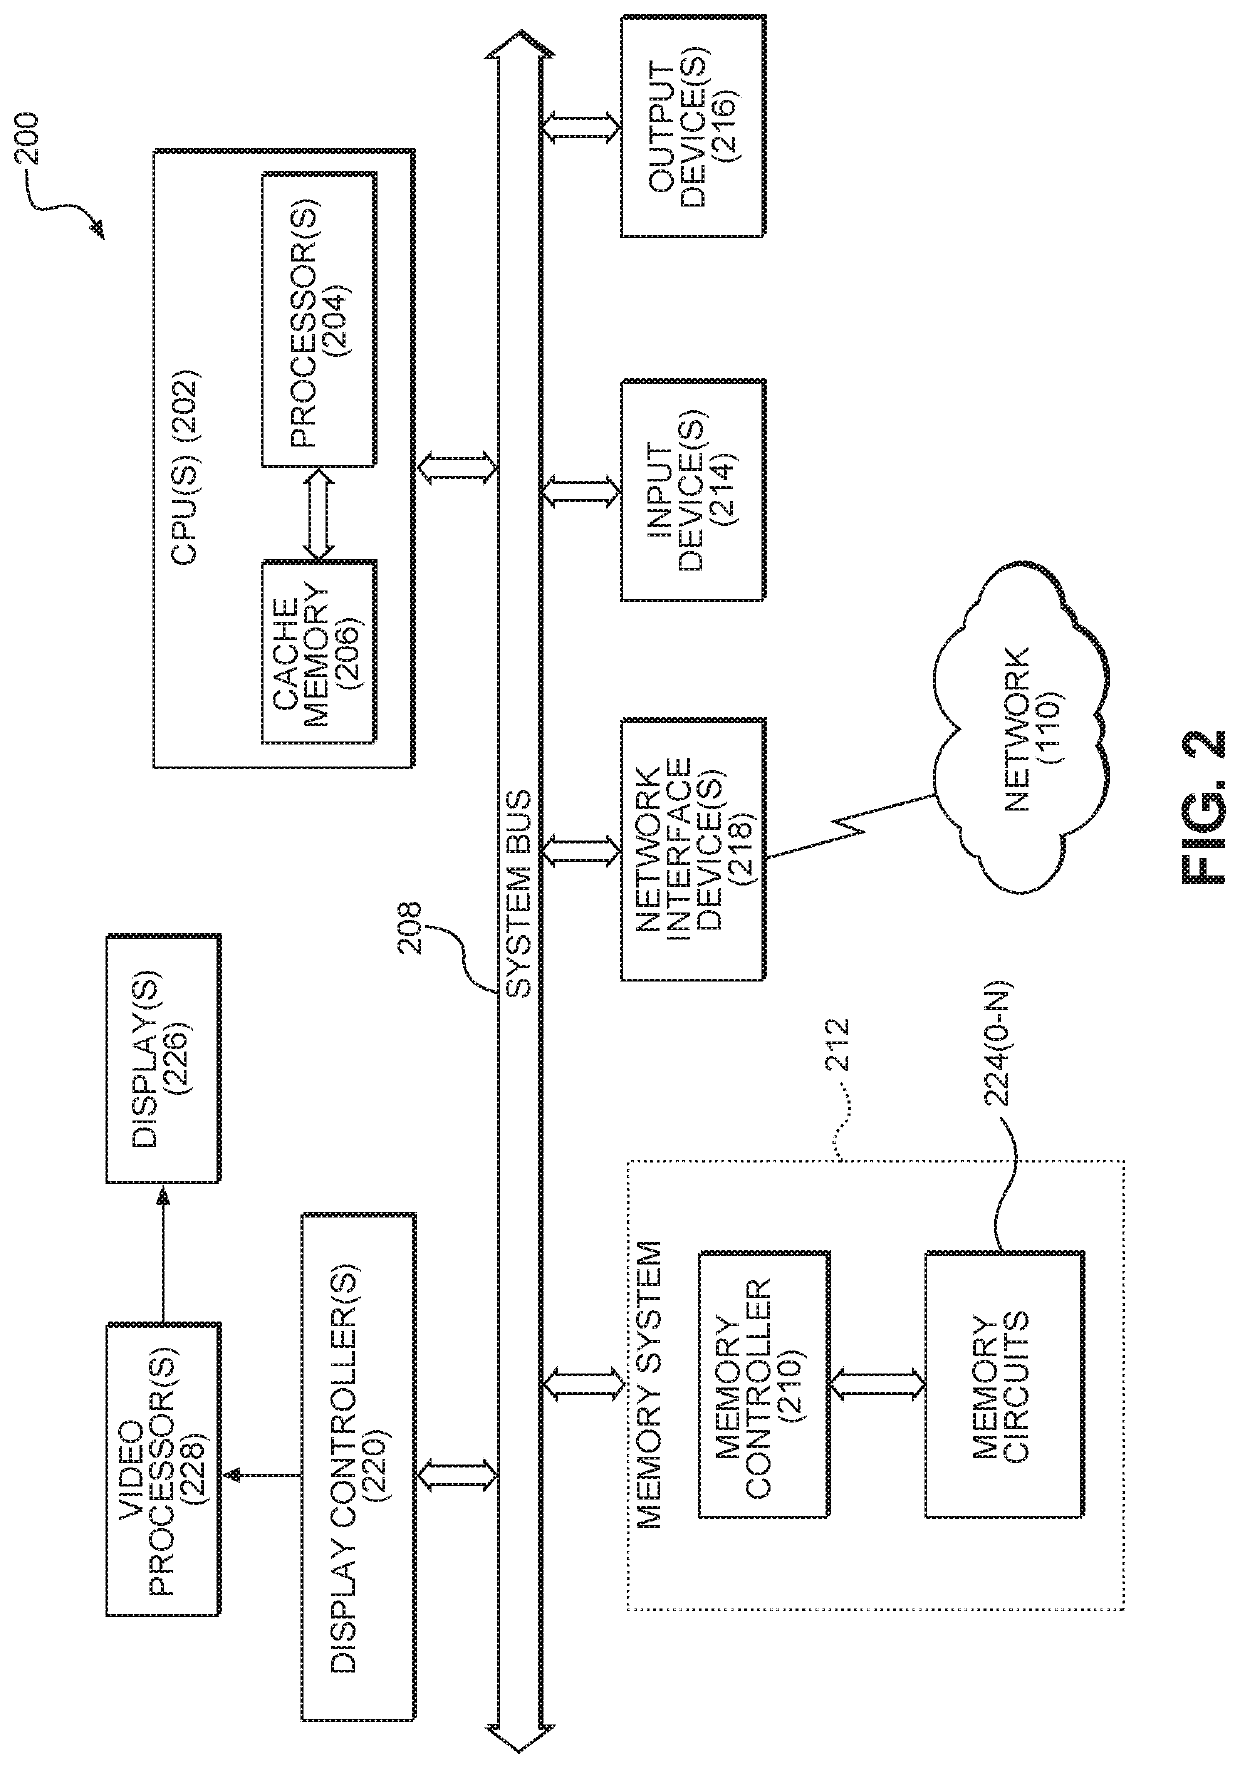 Systems and methods for flash memory conflict avoidance